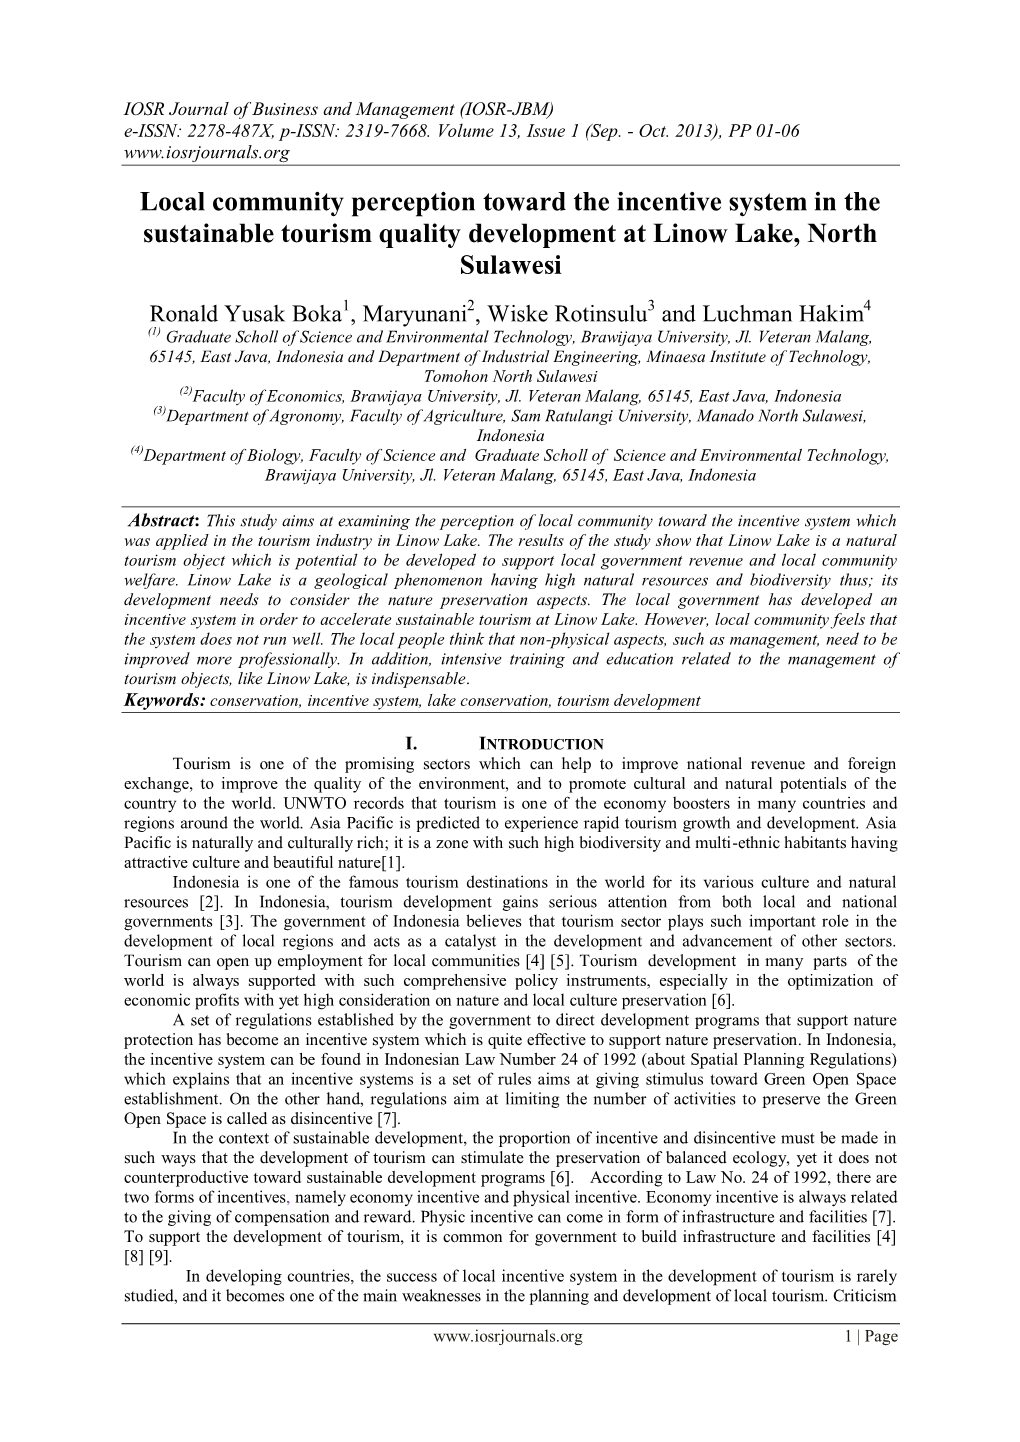 Local Community Perception Toward the Incentive System in the Sustainable Tourism Quality Development at Linow Lake, North Sulawesi